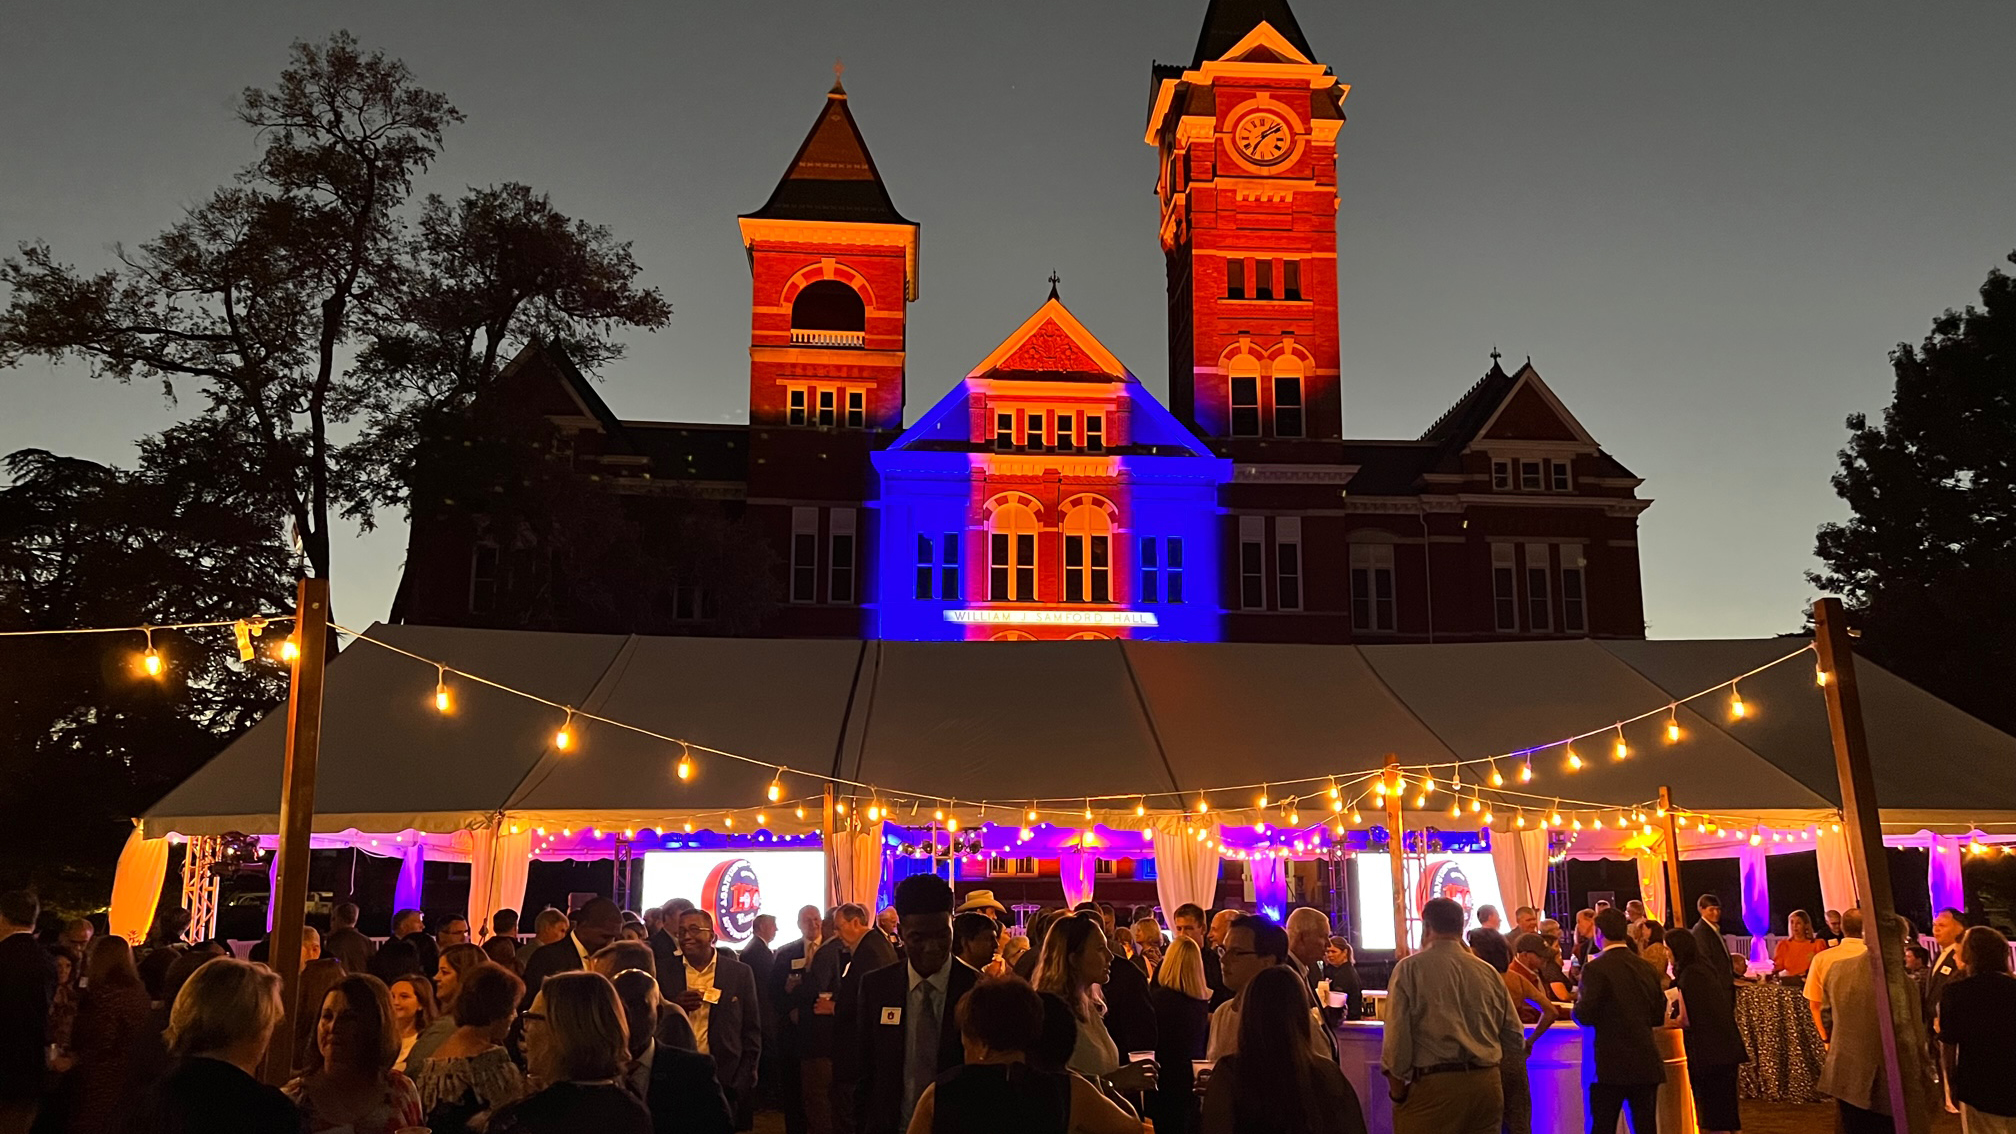 Celebration of the 150th anniversaries of Auburn University's Colleges of Agriculture and Engineering on Samford Lawn